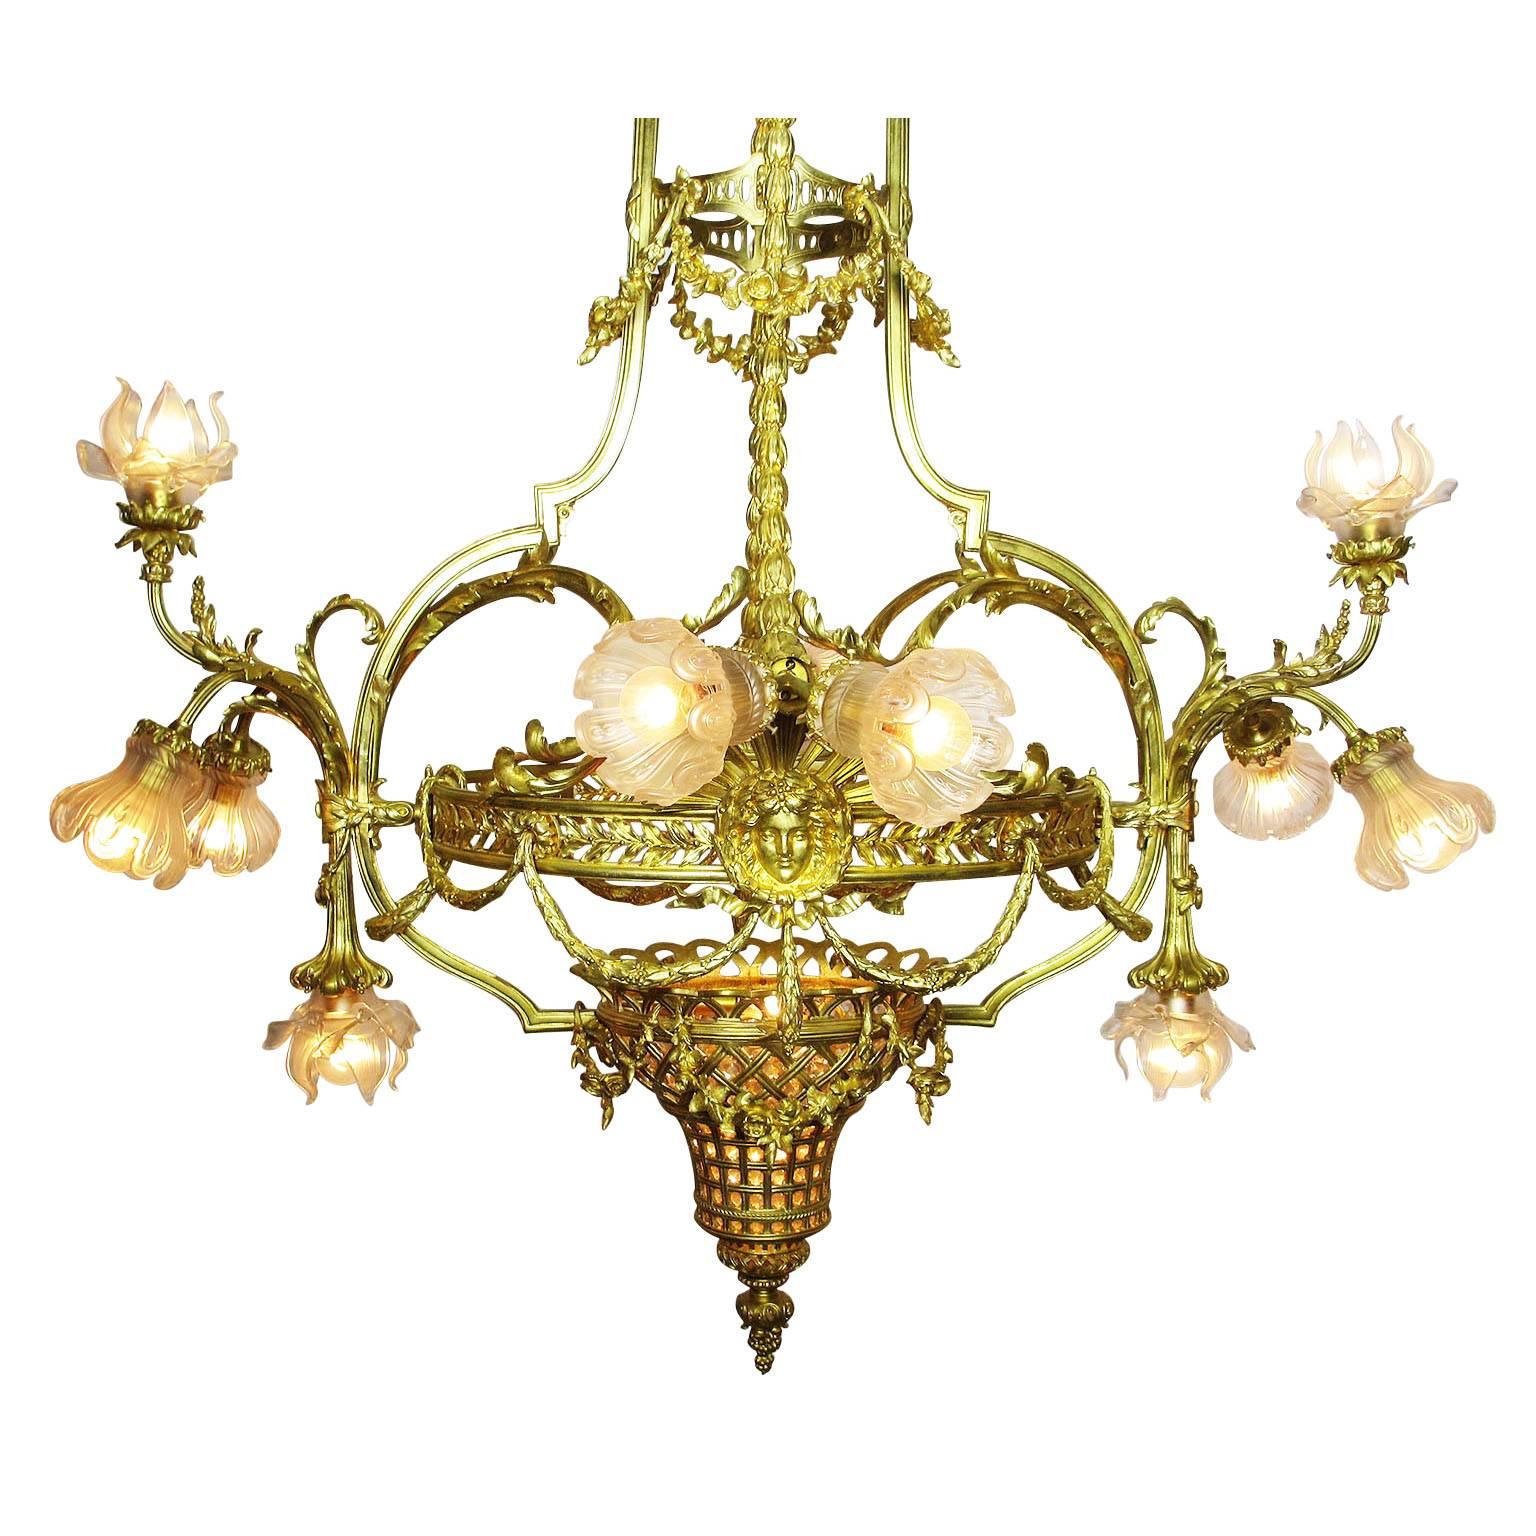 A Very Fine and Large French Belle Epoque 19th/20th Century Louis XIV Style Twelve-Light Gilt-bronze Figural Chandelier with frosted glass shades. The ovoid shaped body with scrolled acanthus corona suspending a medallion symbolic of Louis XIV, the